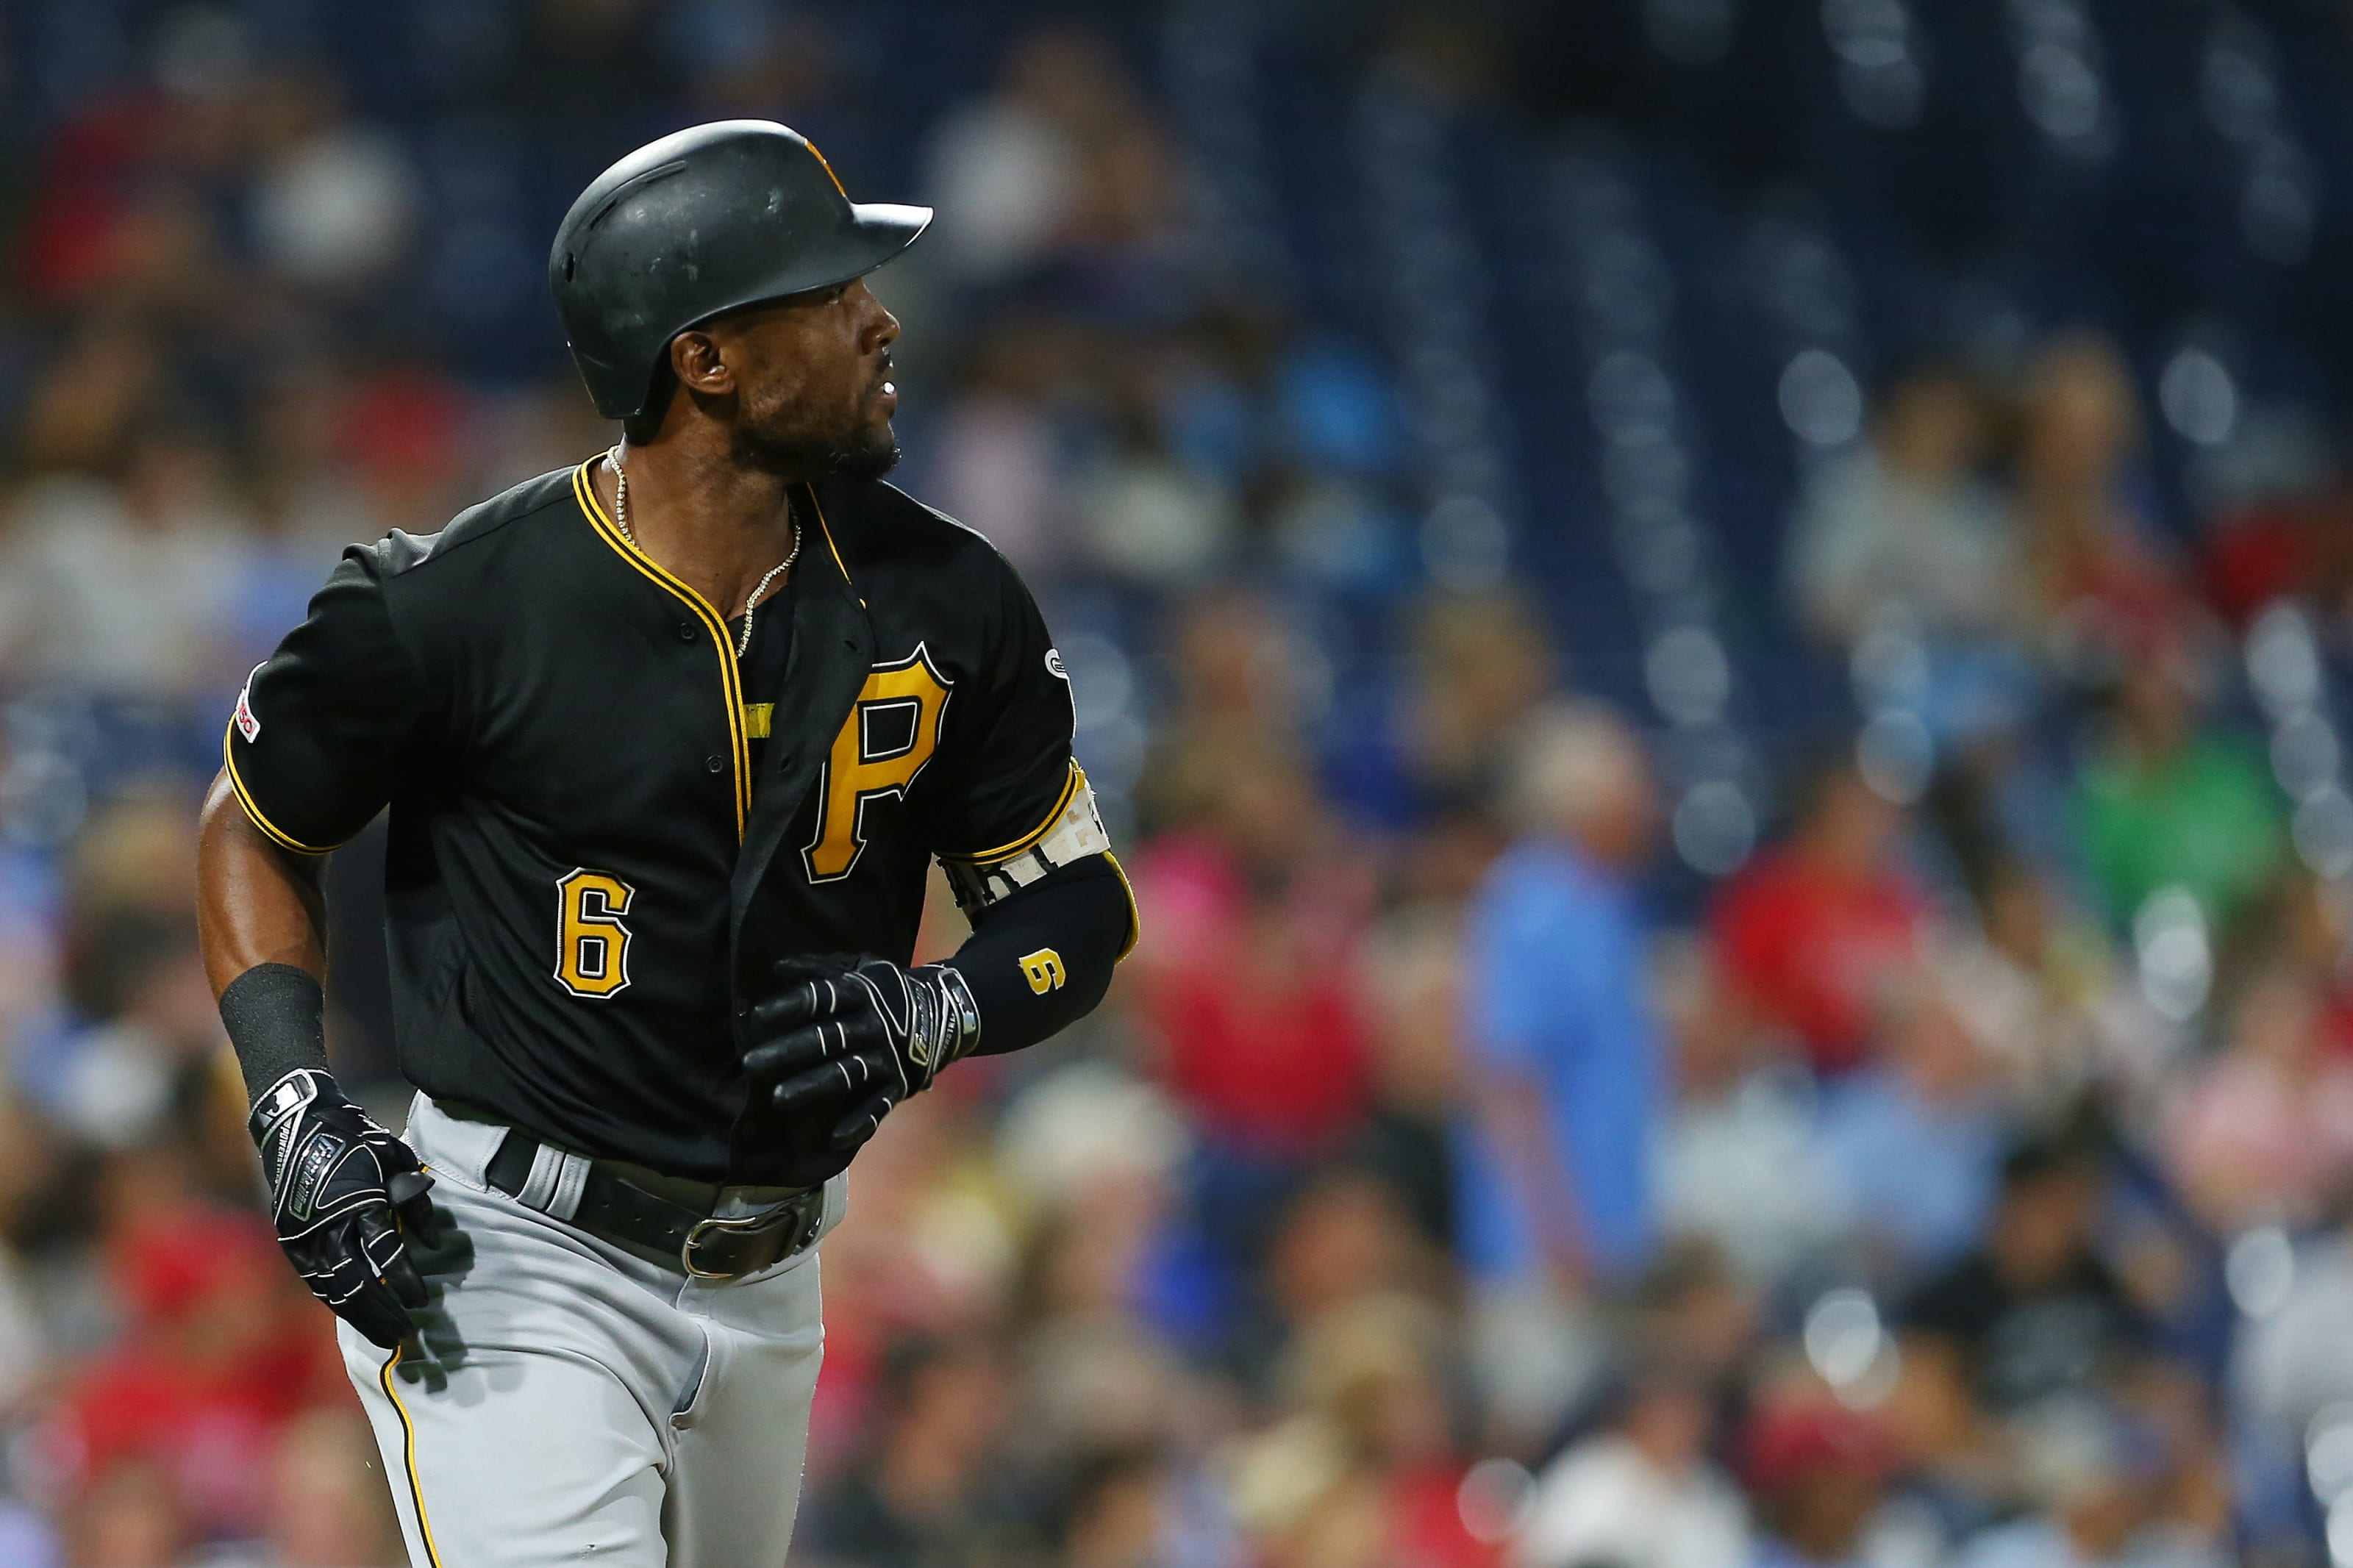 Pittsburgh Pirates: Top Five Center Fielders in Franchise History